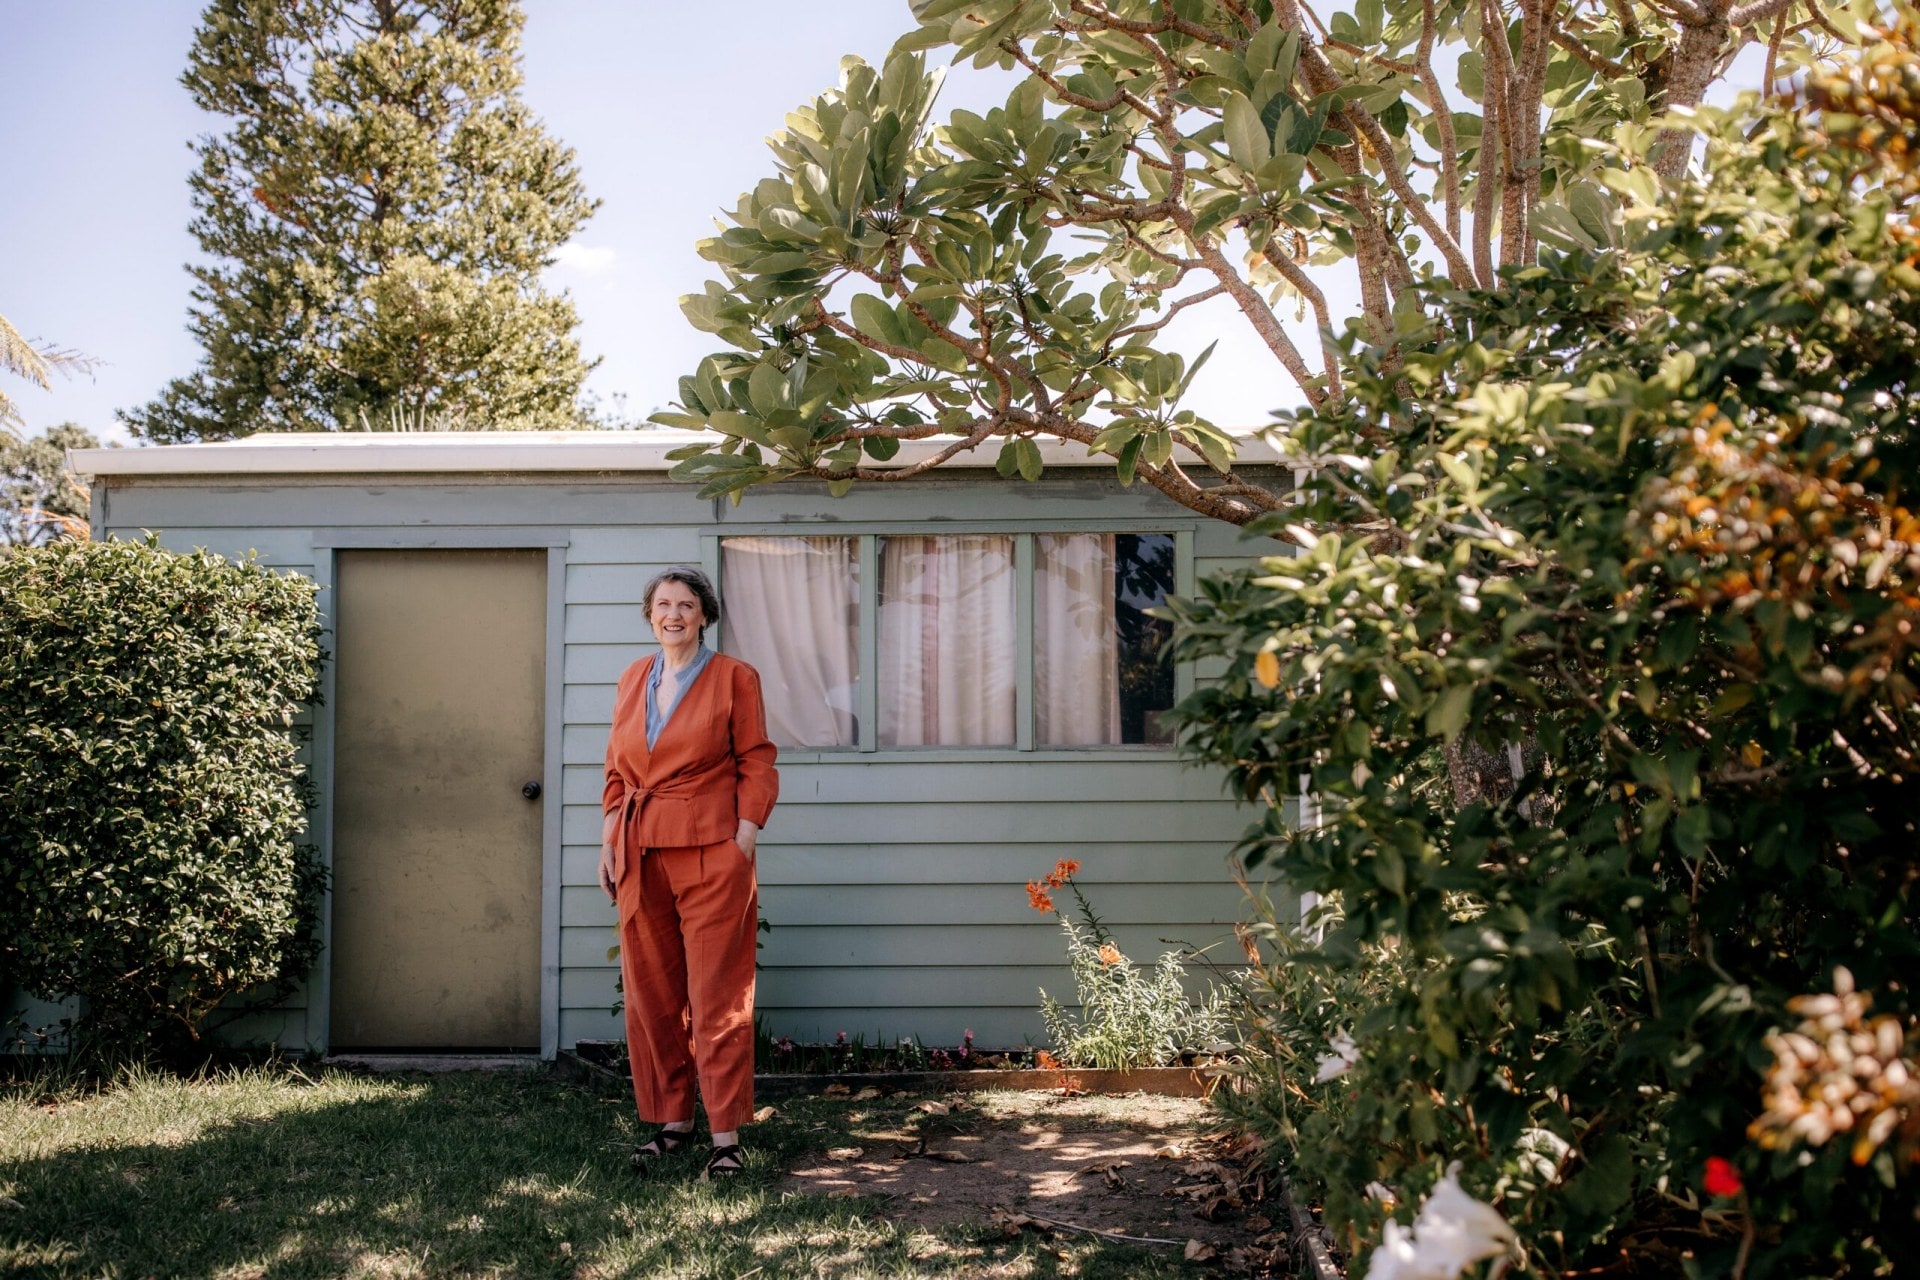 Helen Clark standing outside garden shed wearing coral red outfit